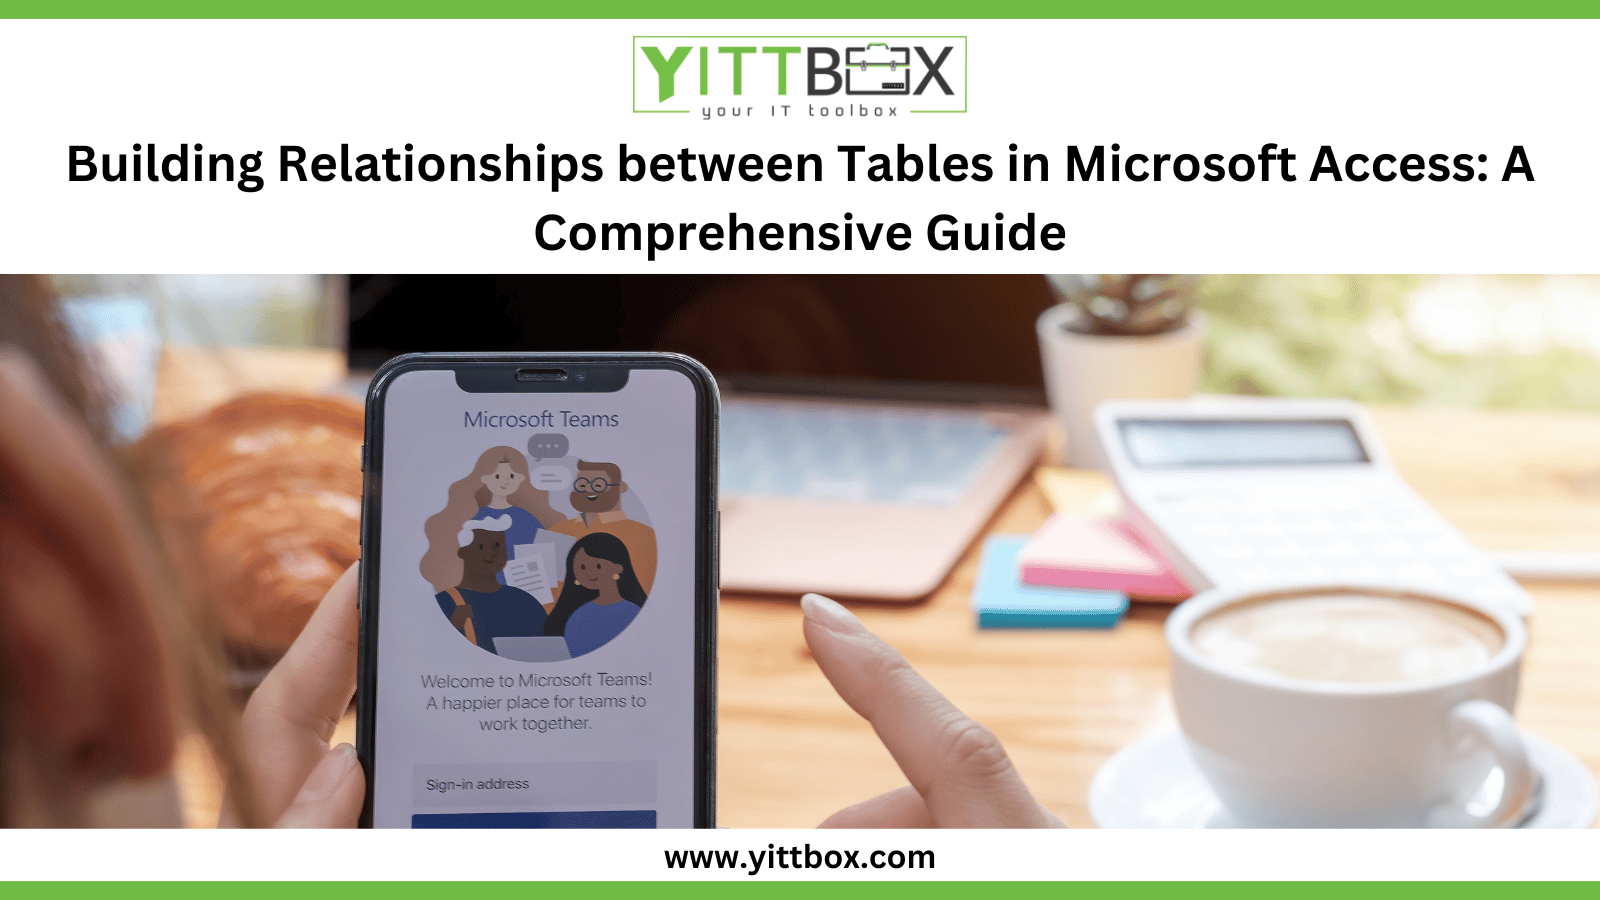 Building Relationships between Tables in Microsoft Access: A Comprehensive Guide